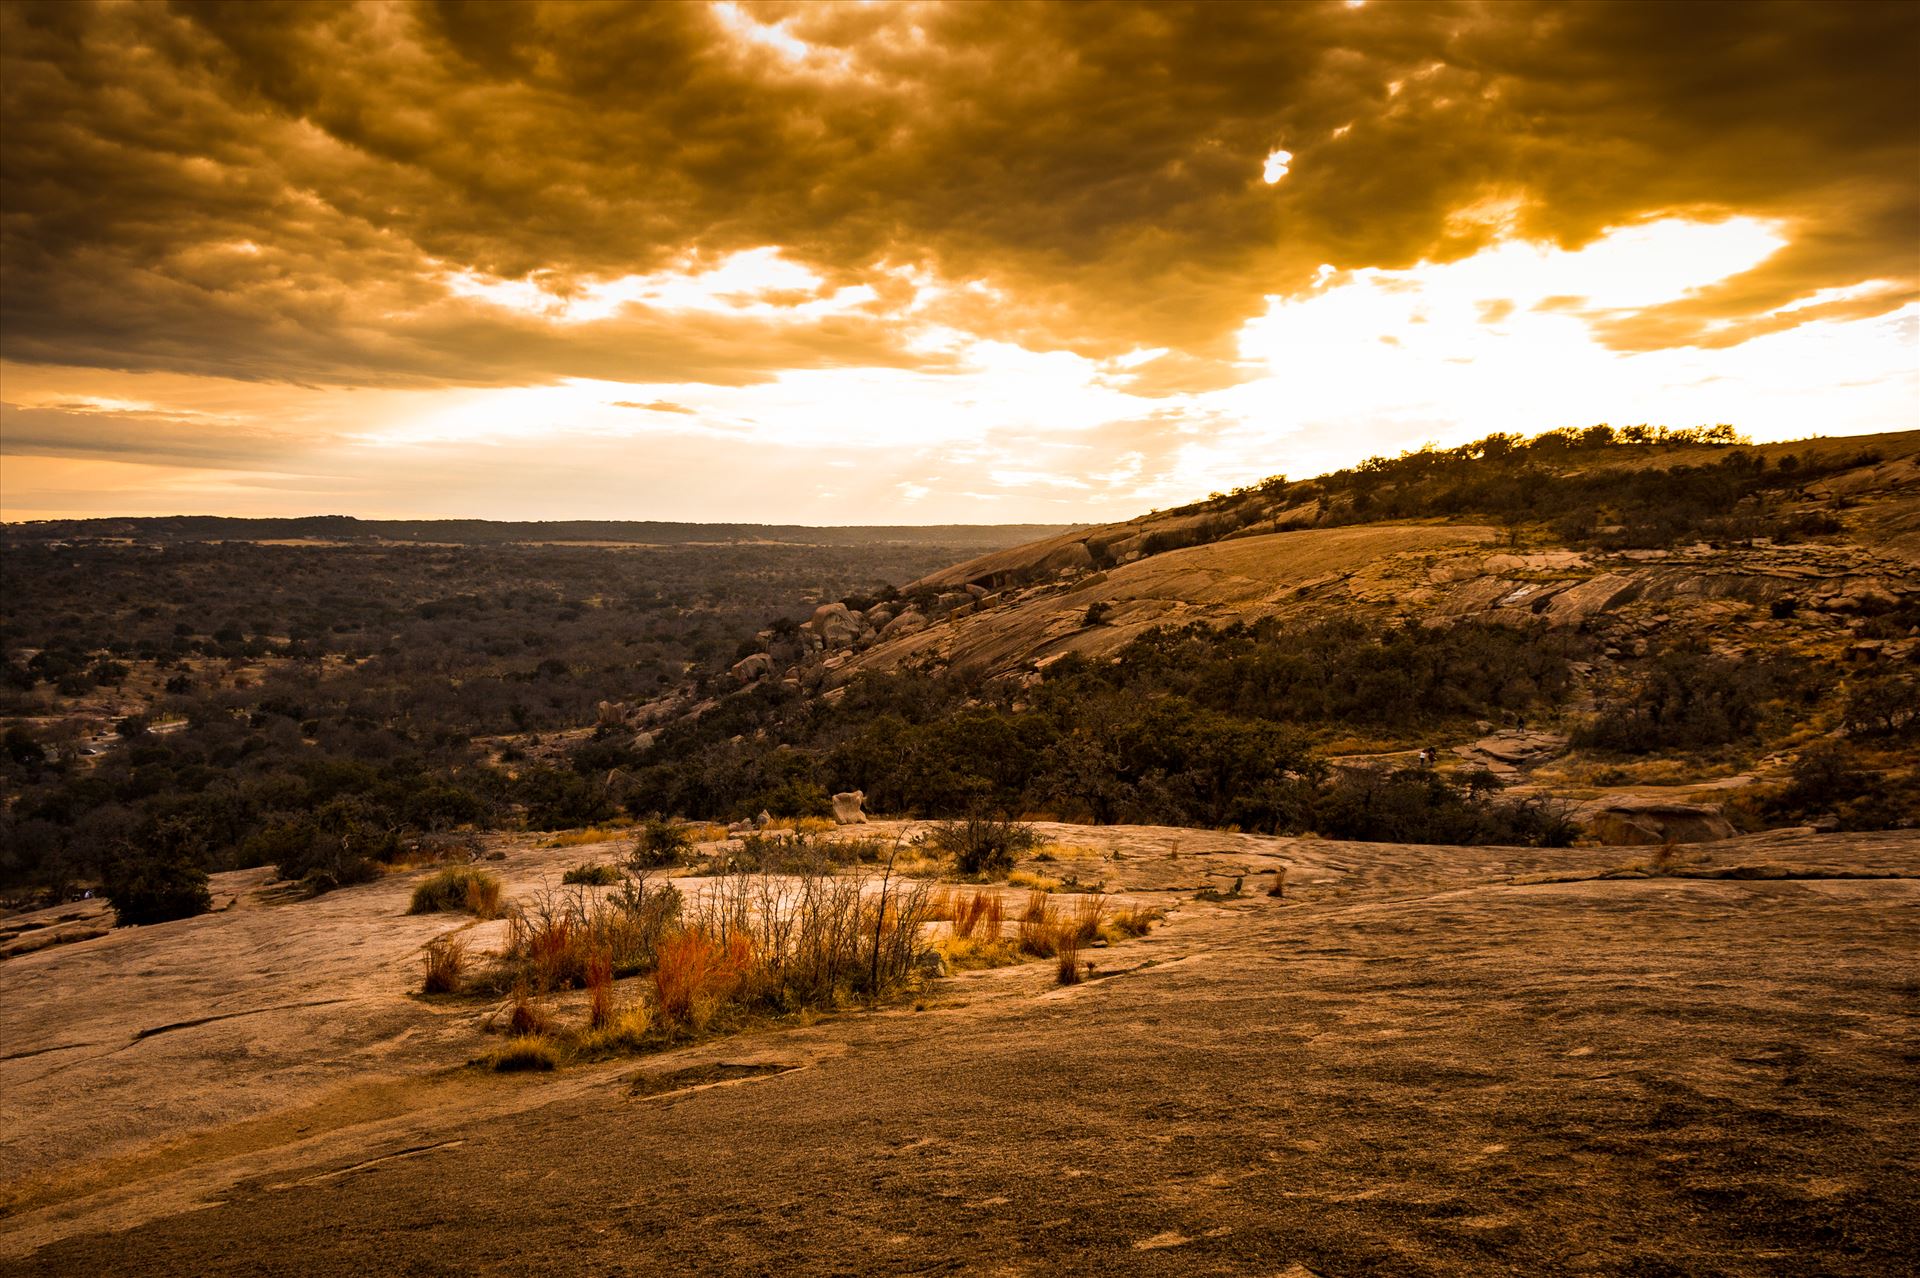 20140112-Enchanted Rock-DSLR-012.jpg  by Charles Smith Photography